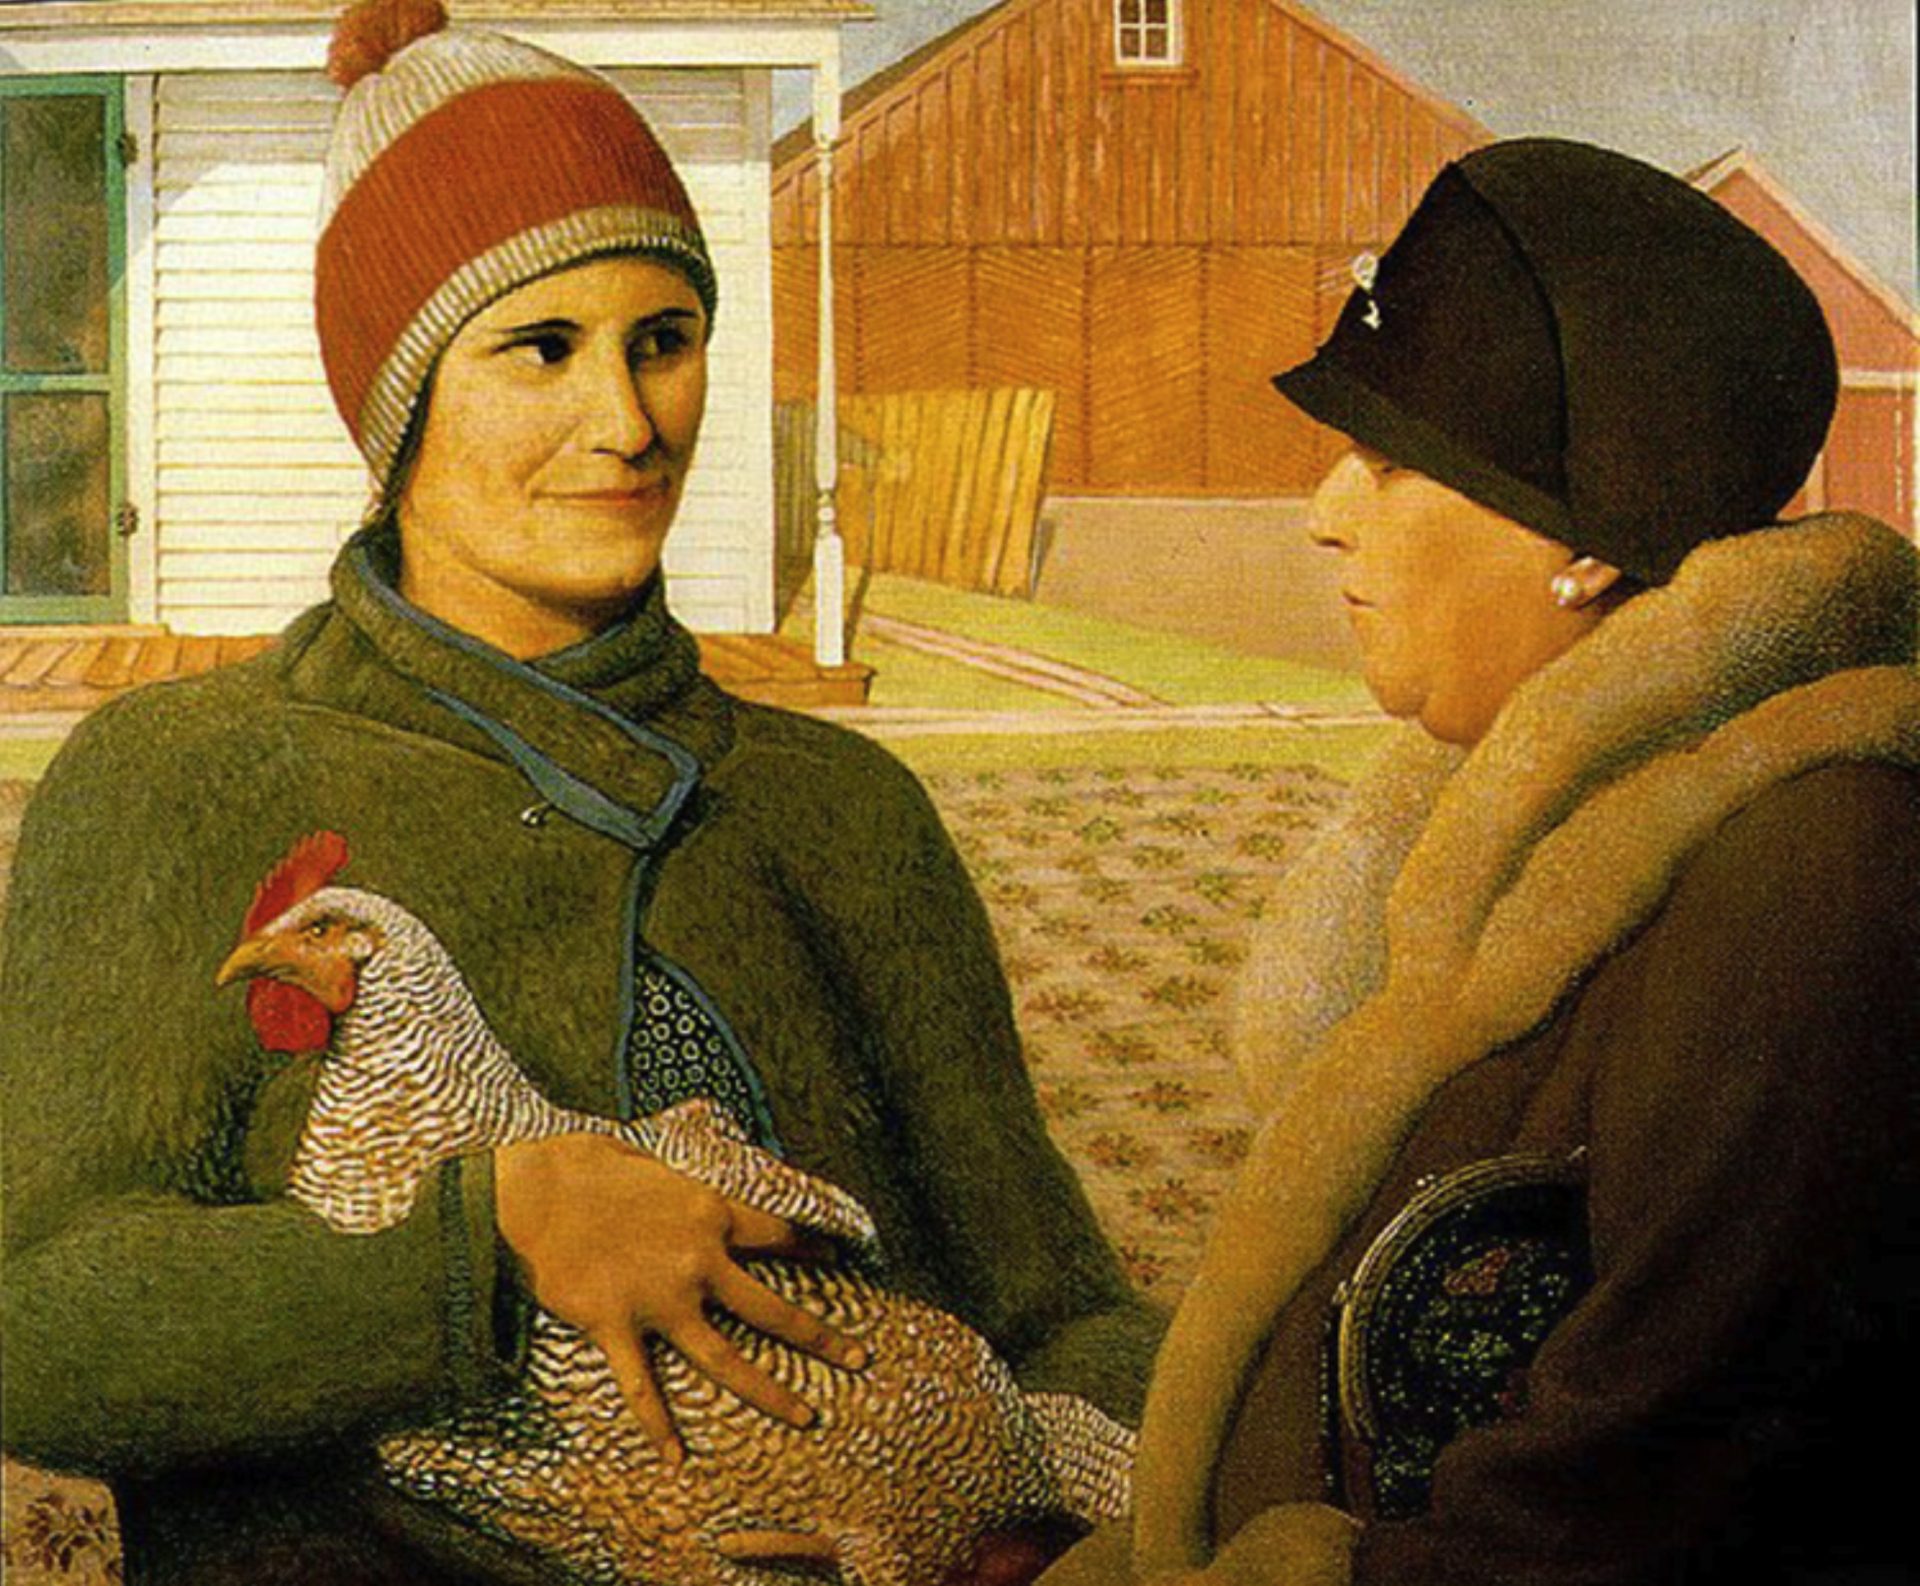 The painting depicts a face-off between a city woman in a fur-lined coat and fashionable hat, and a farm woman dressed in work clothes, each evaluating the other. The city woman looks at the hen held by the farm woman, possibly her future meal, while the farm woman appraises her city counterpart with a confident gaze. The scene hints at a silent negotiation amidst the hardships of the Depression era, underlining the farm woman's self-reliance and resilience. The emergence of young plants in the background indicates that it's spring.